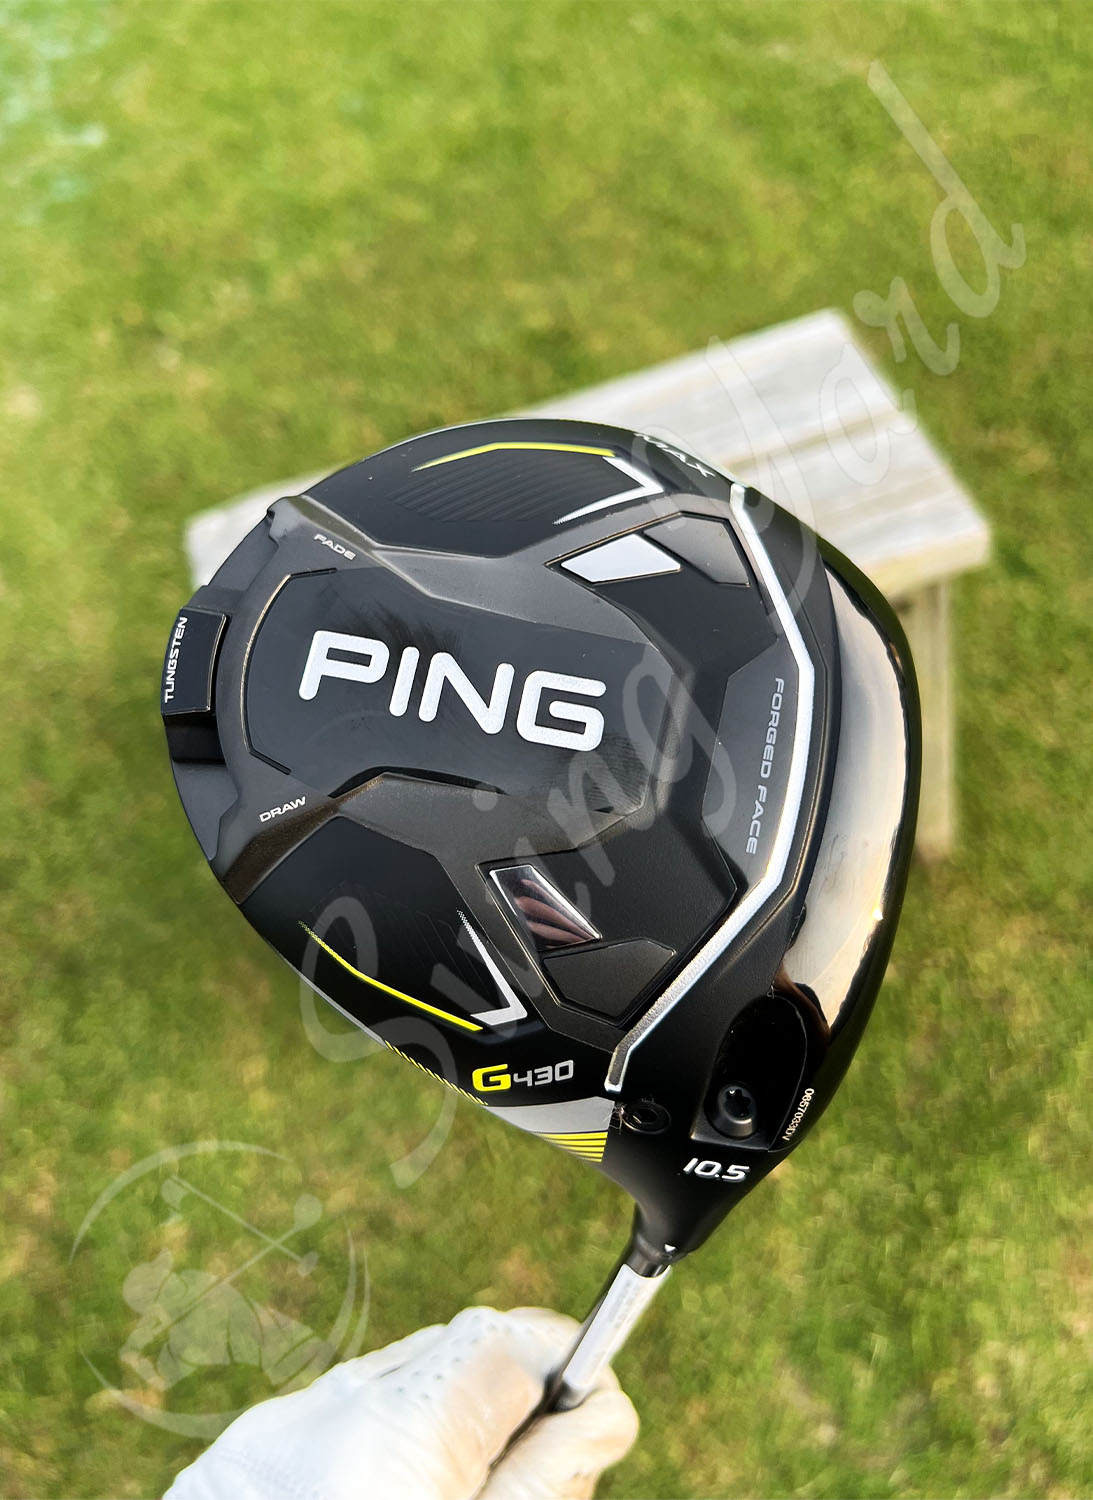 Me holding a Ping G430 max driver for testing at the golf course